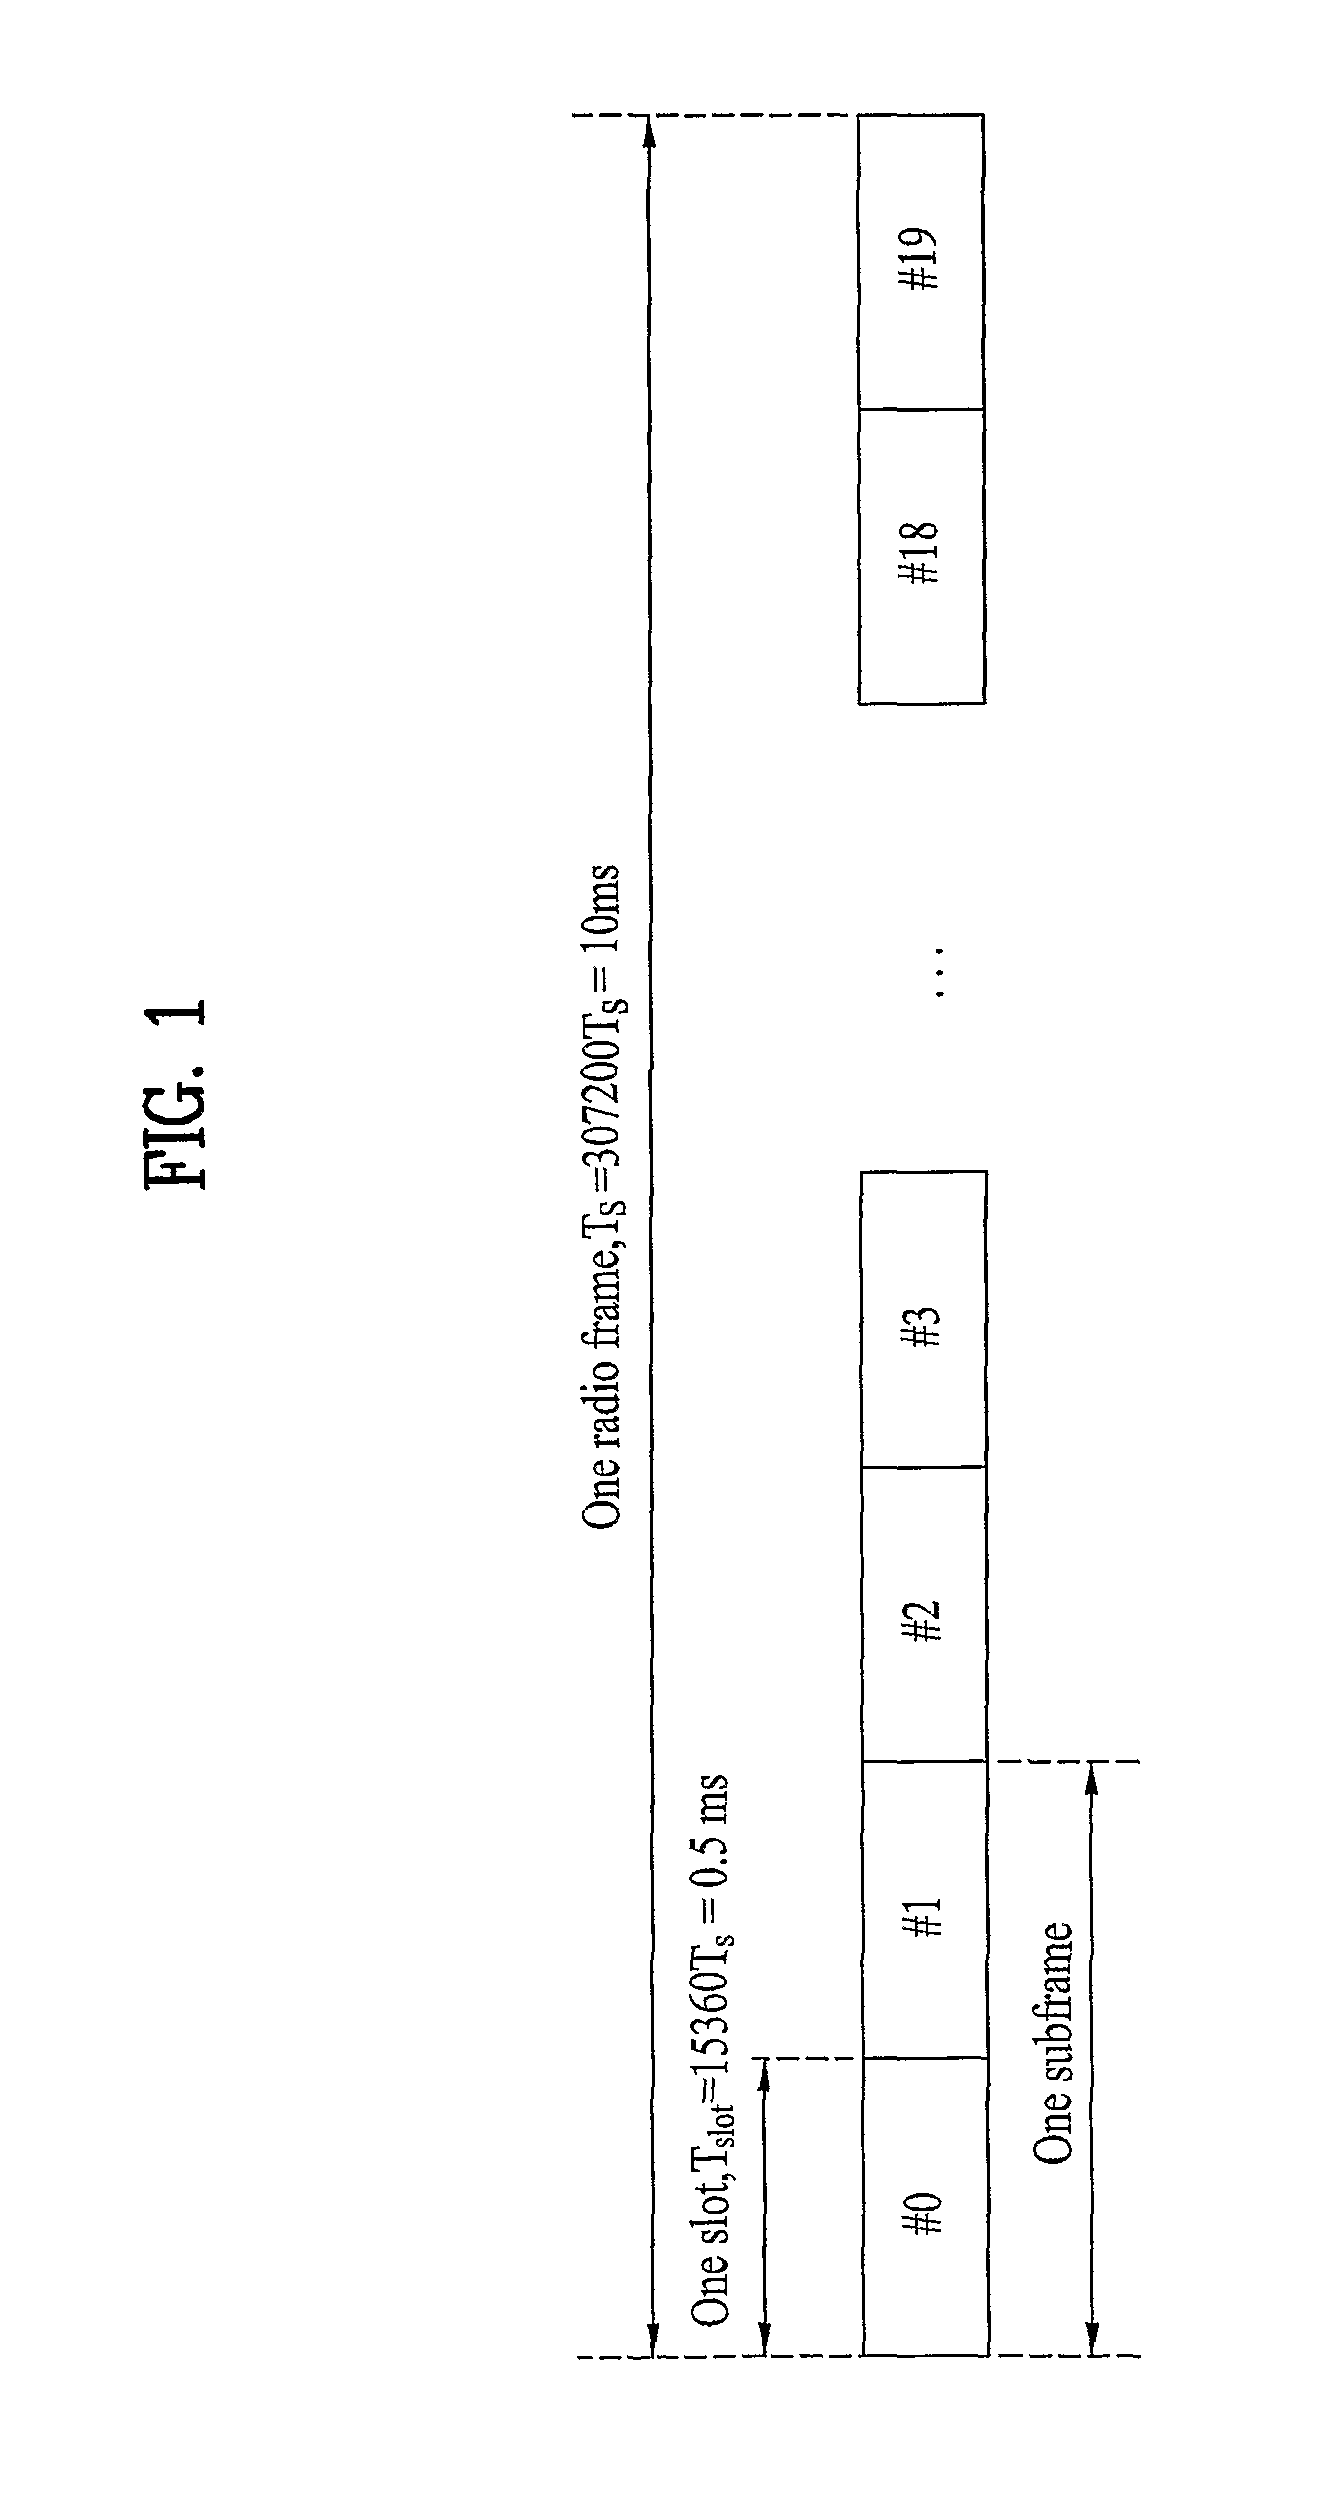 Method for transmitting reference signals in a downlink multiple input multiple output system